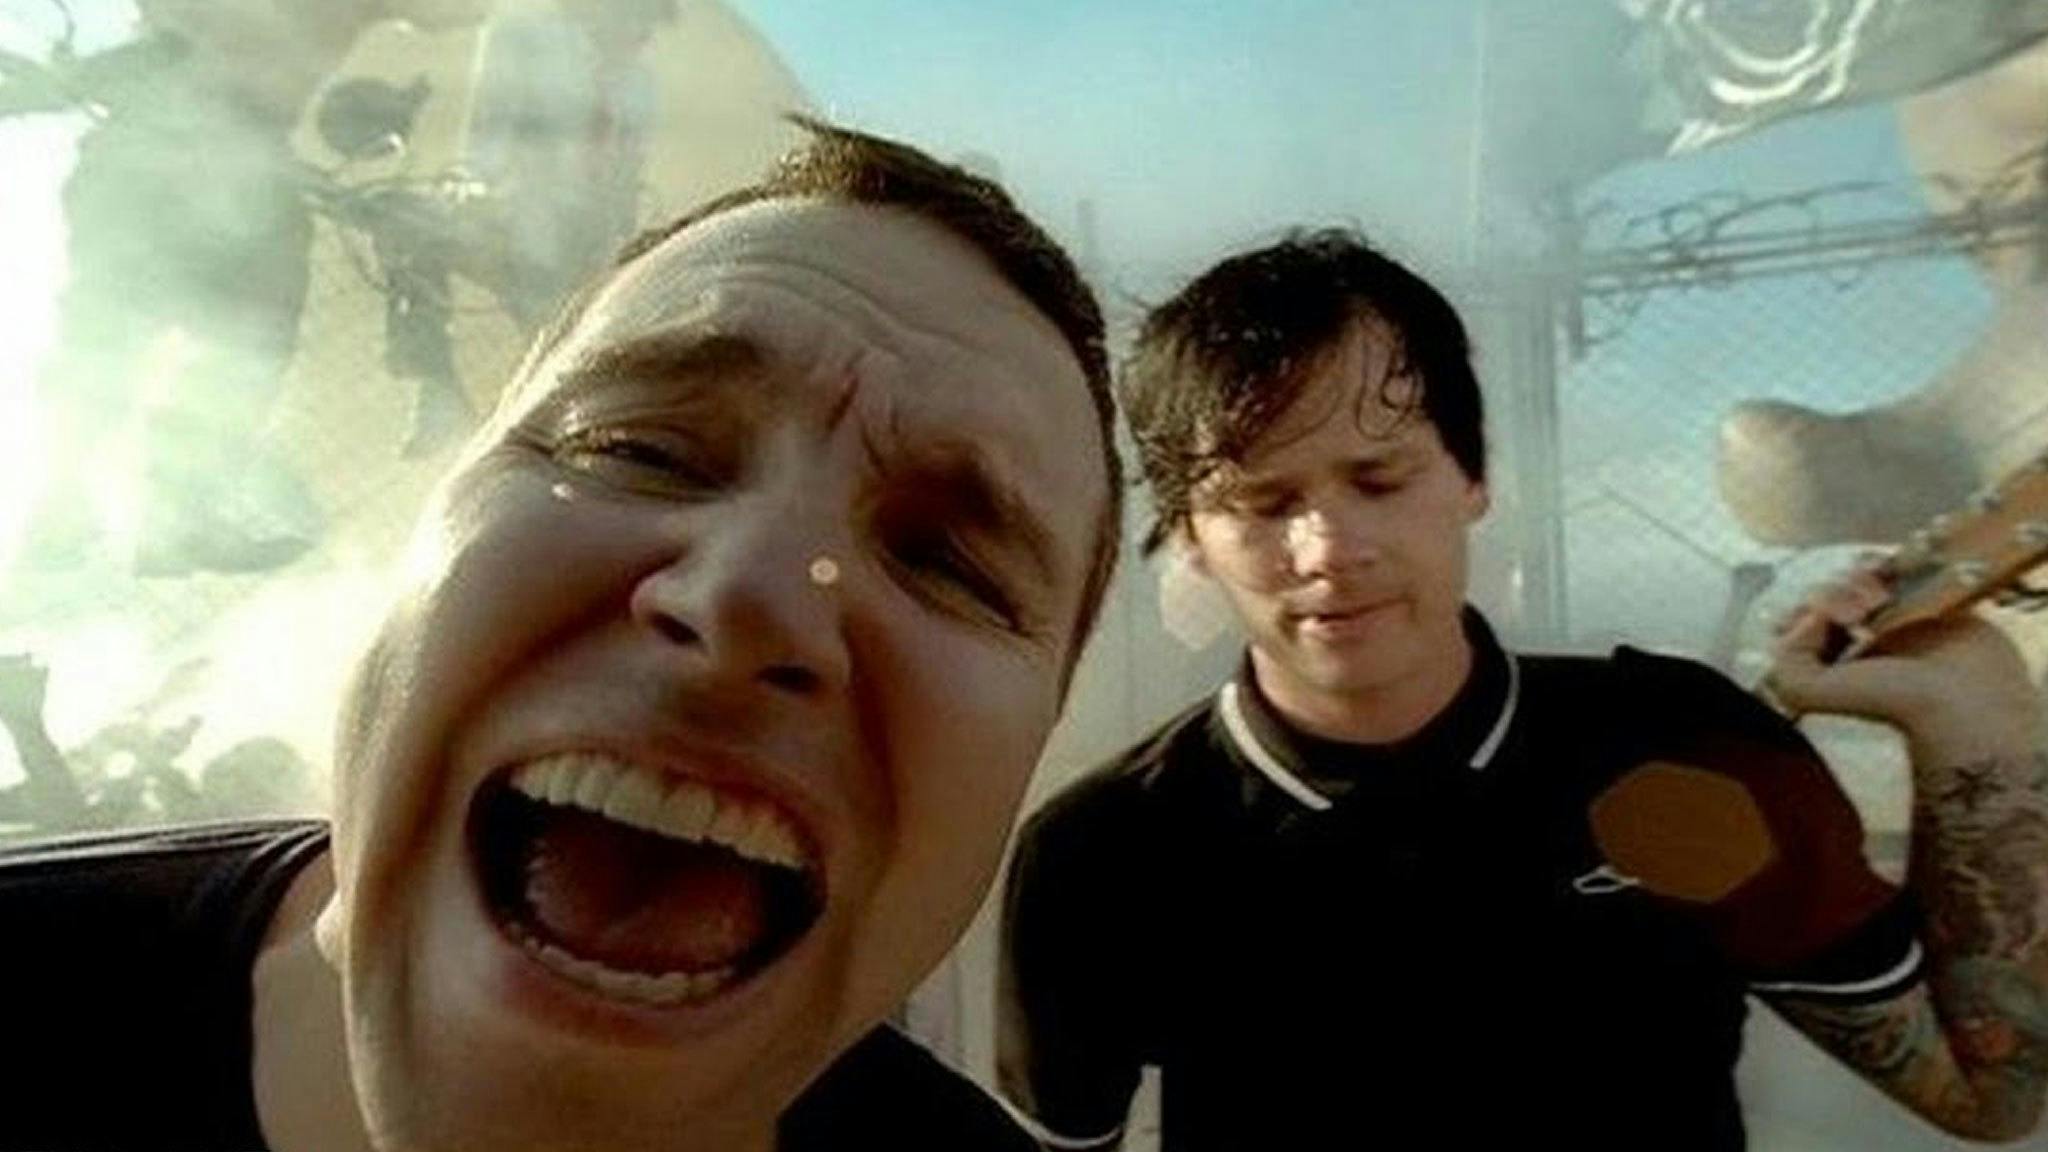 A deep dive into blink-182’s music video for Feeling This